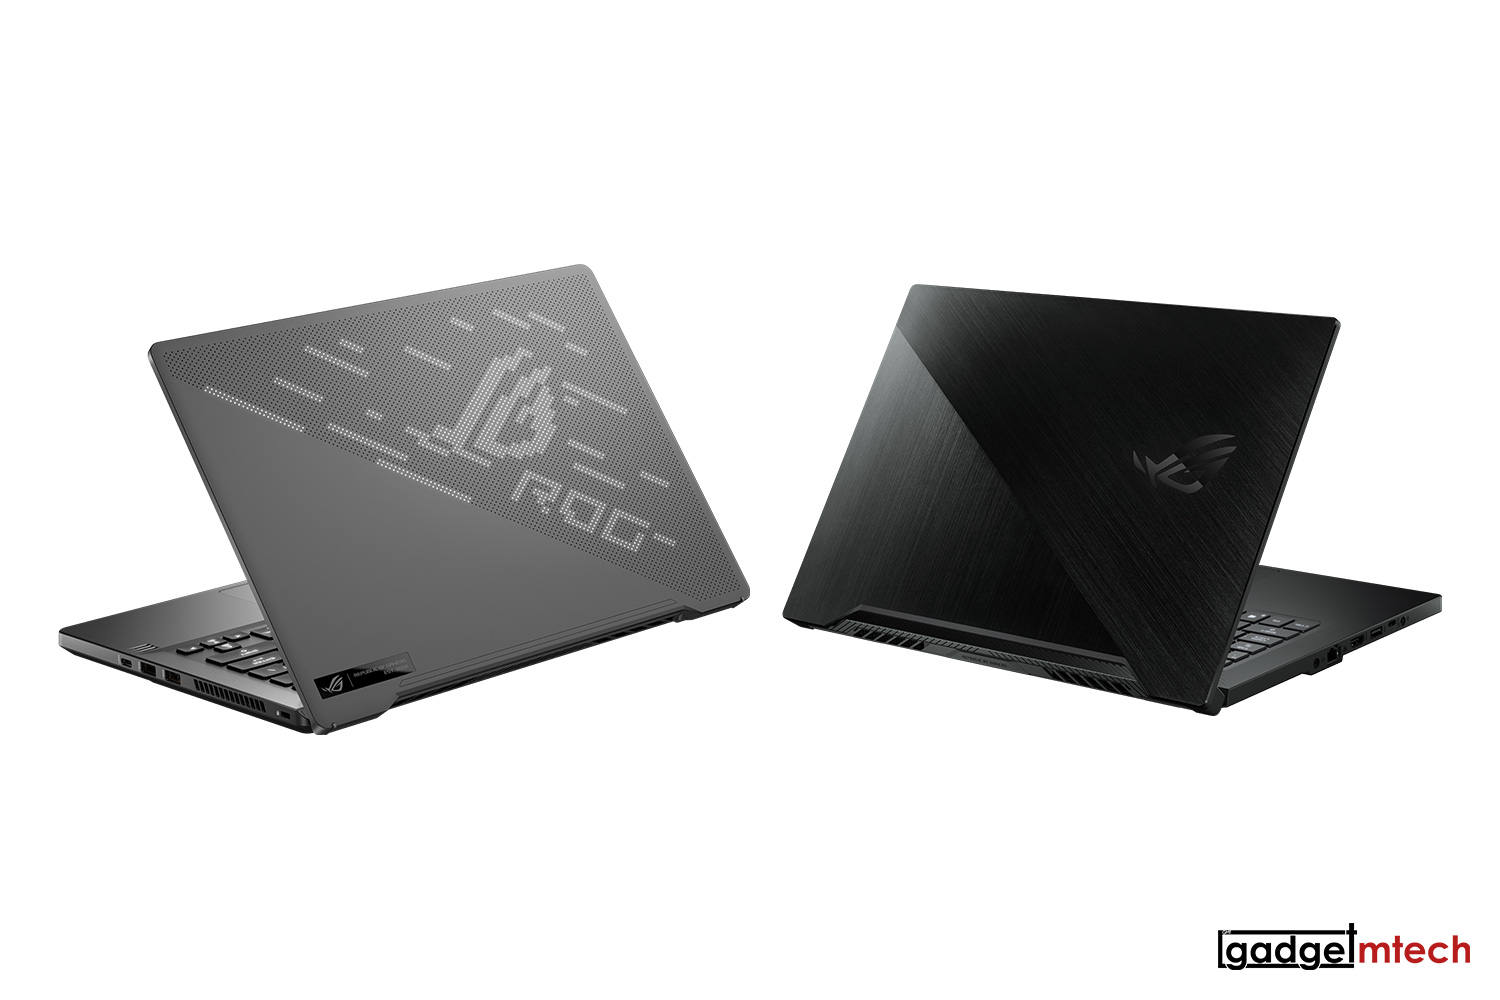 ASUS ROG Zephyrus G14 and G15